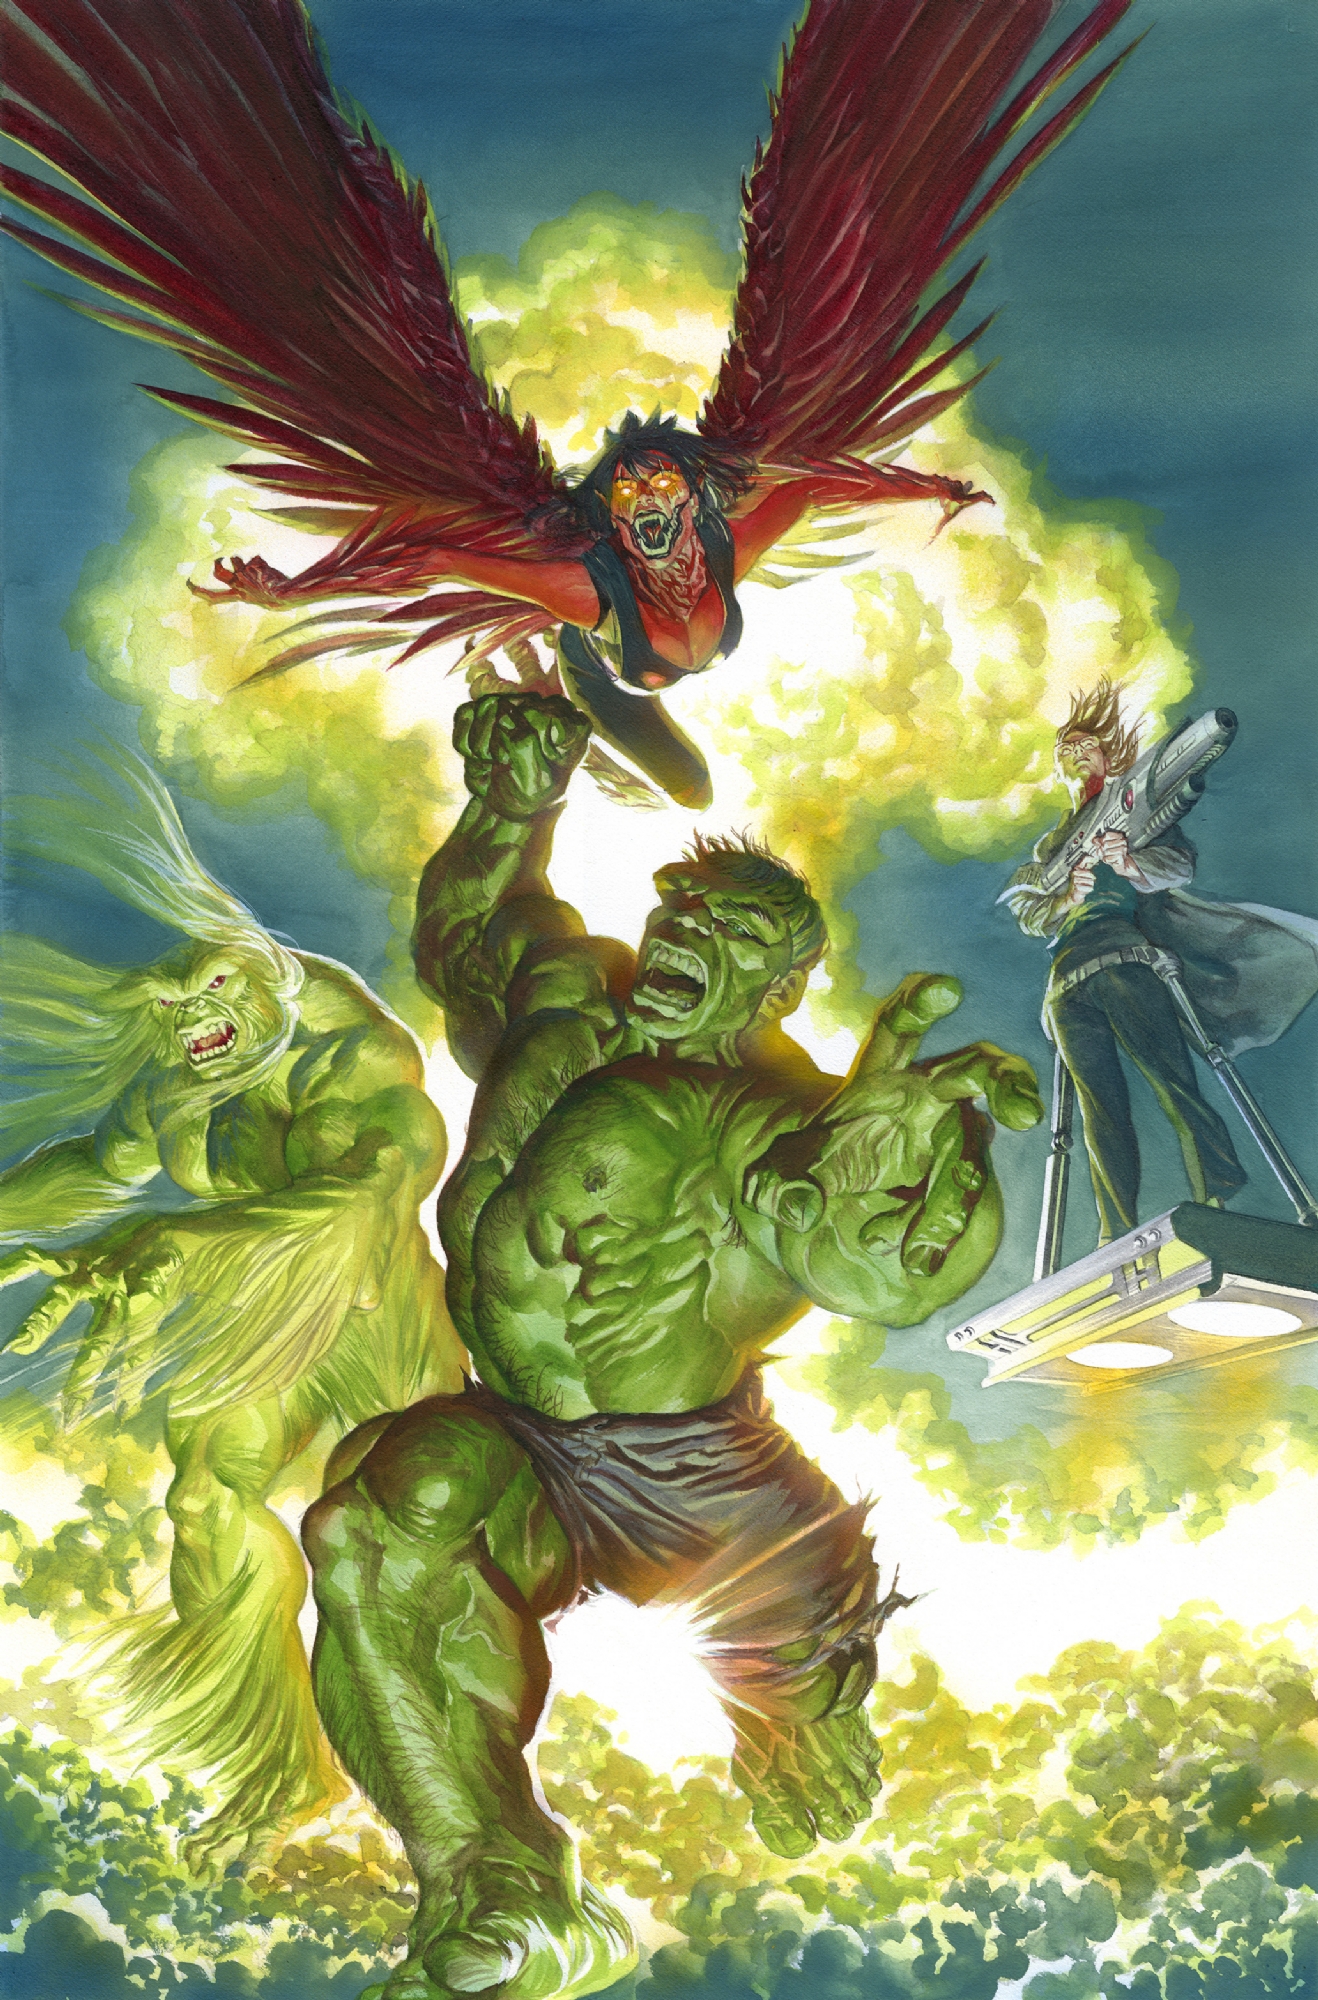 IMMORTAL HULK #15 SET OF 2 ALEX ROSS VARIANT COVER & COVER A MARVEL 2019 NM